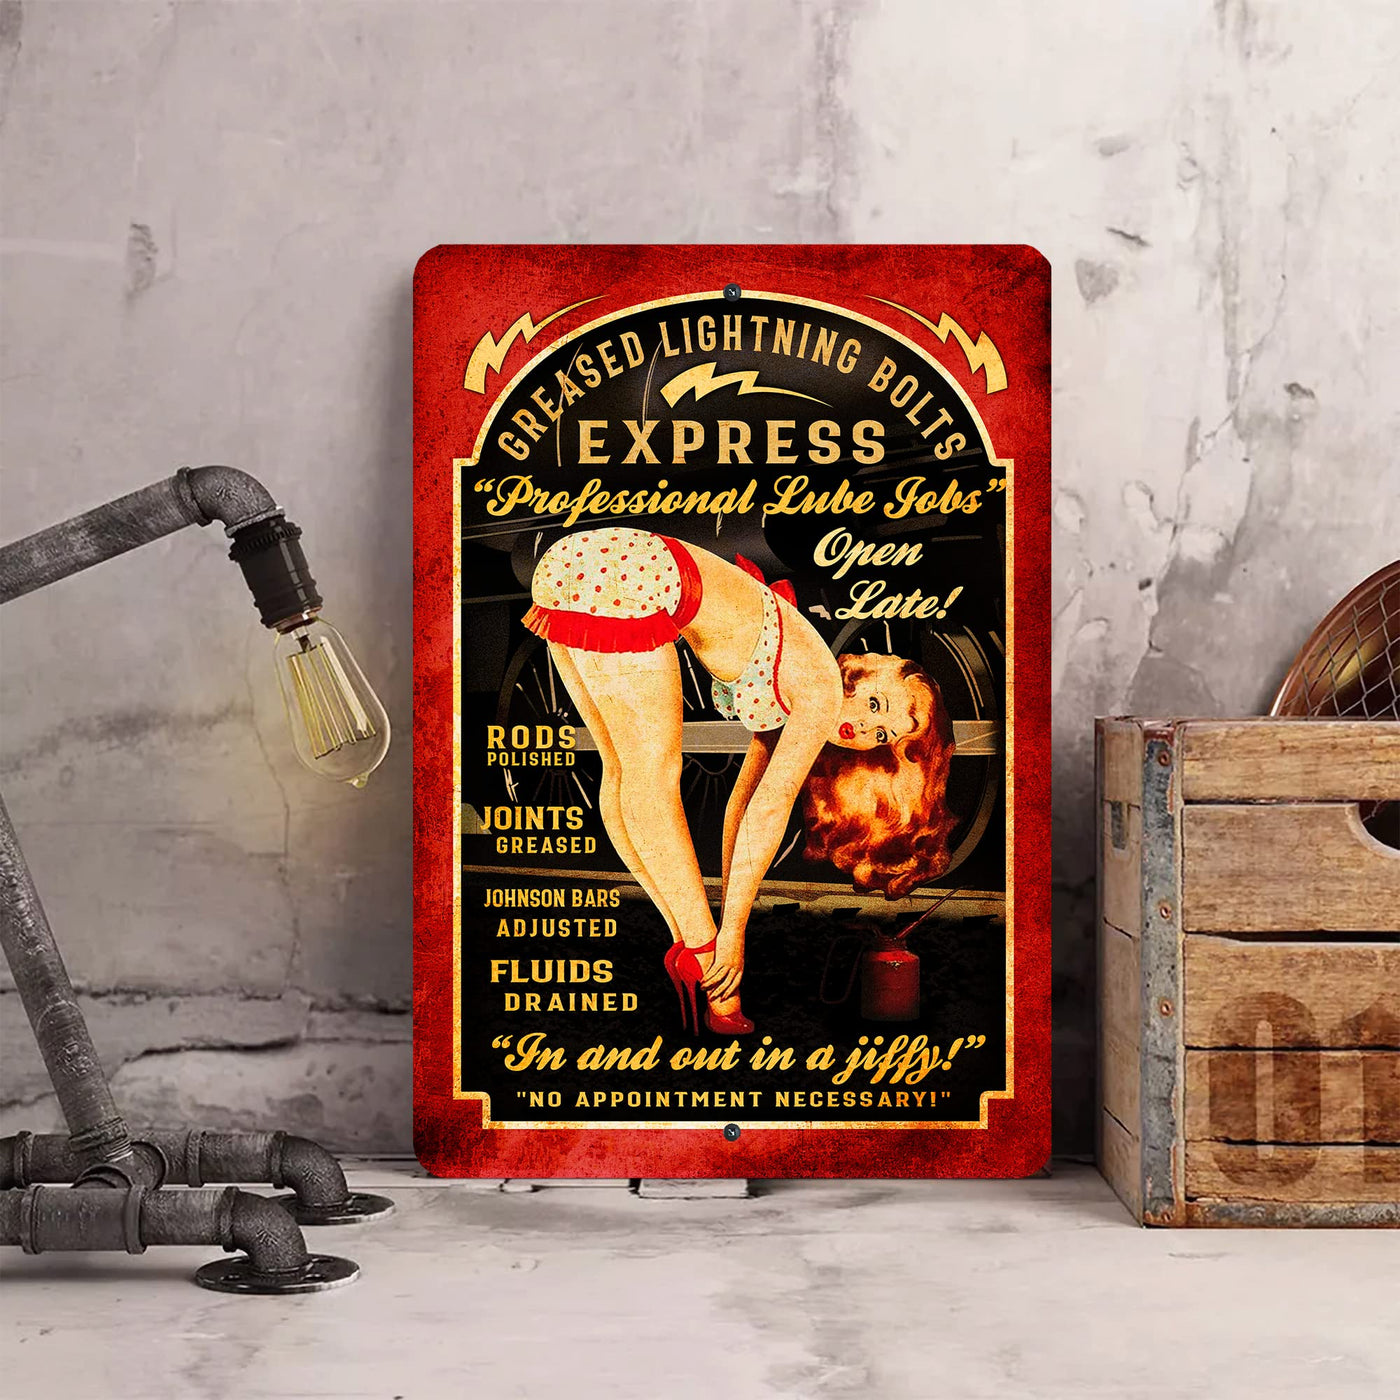 Greased Lightning Express Metal Wall Art Vintage Sign -8 x 12" Funny Rustic Garage Sign for Bar, Man Cave, Tool Shop - Retro Antique Tin Pinup Sign -Great Gift for Home, Outdoor, Mechanic Signs!